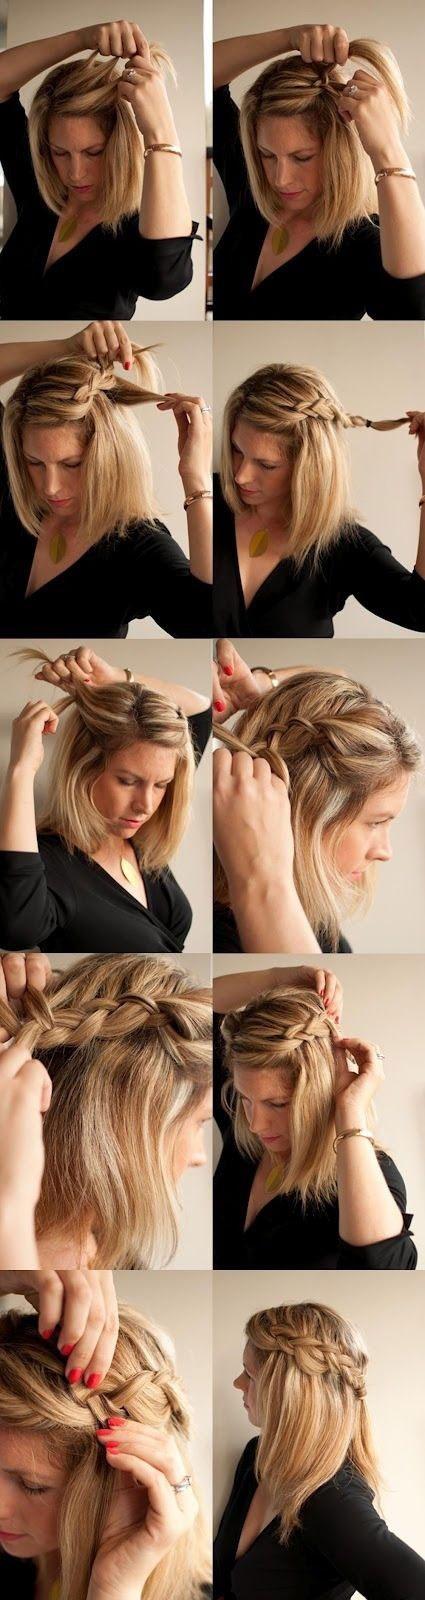 Cool hairstyles for medium length hair cool-hairstyles-for-medium-length-hair-54_15